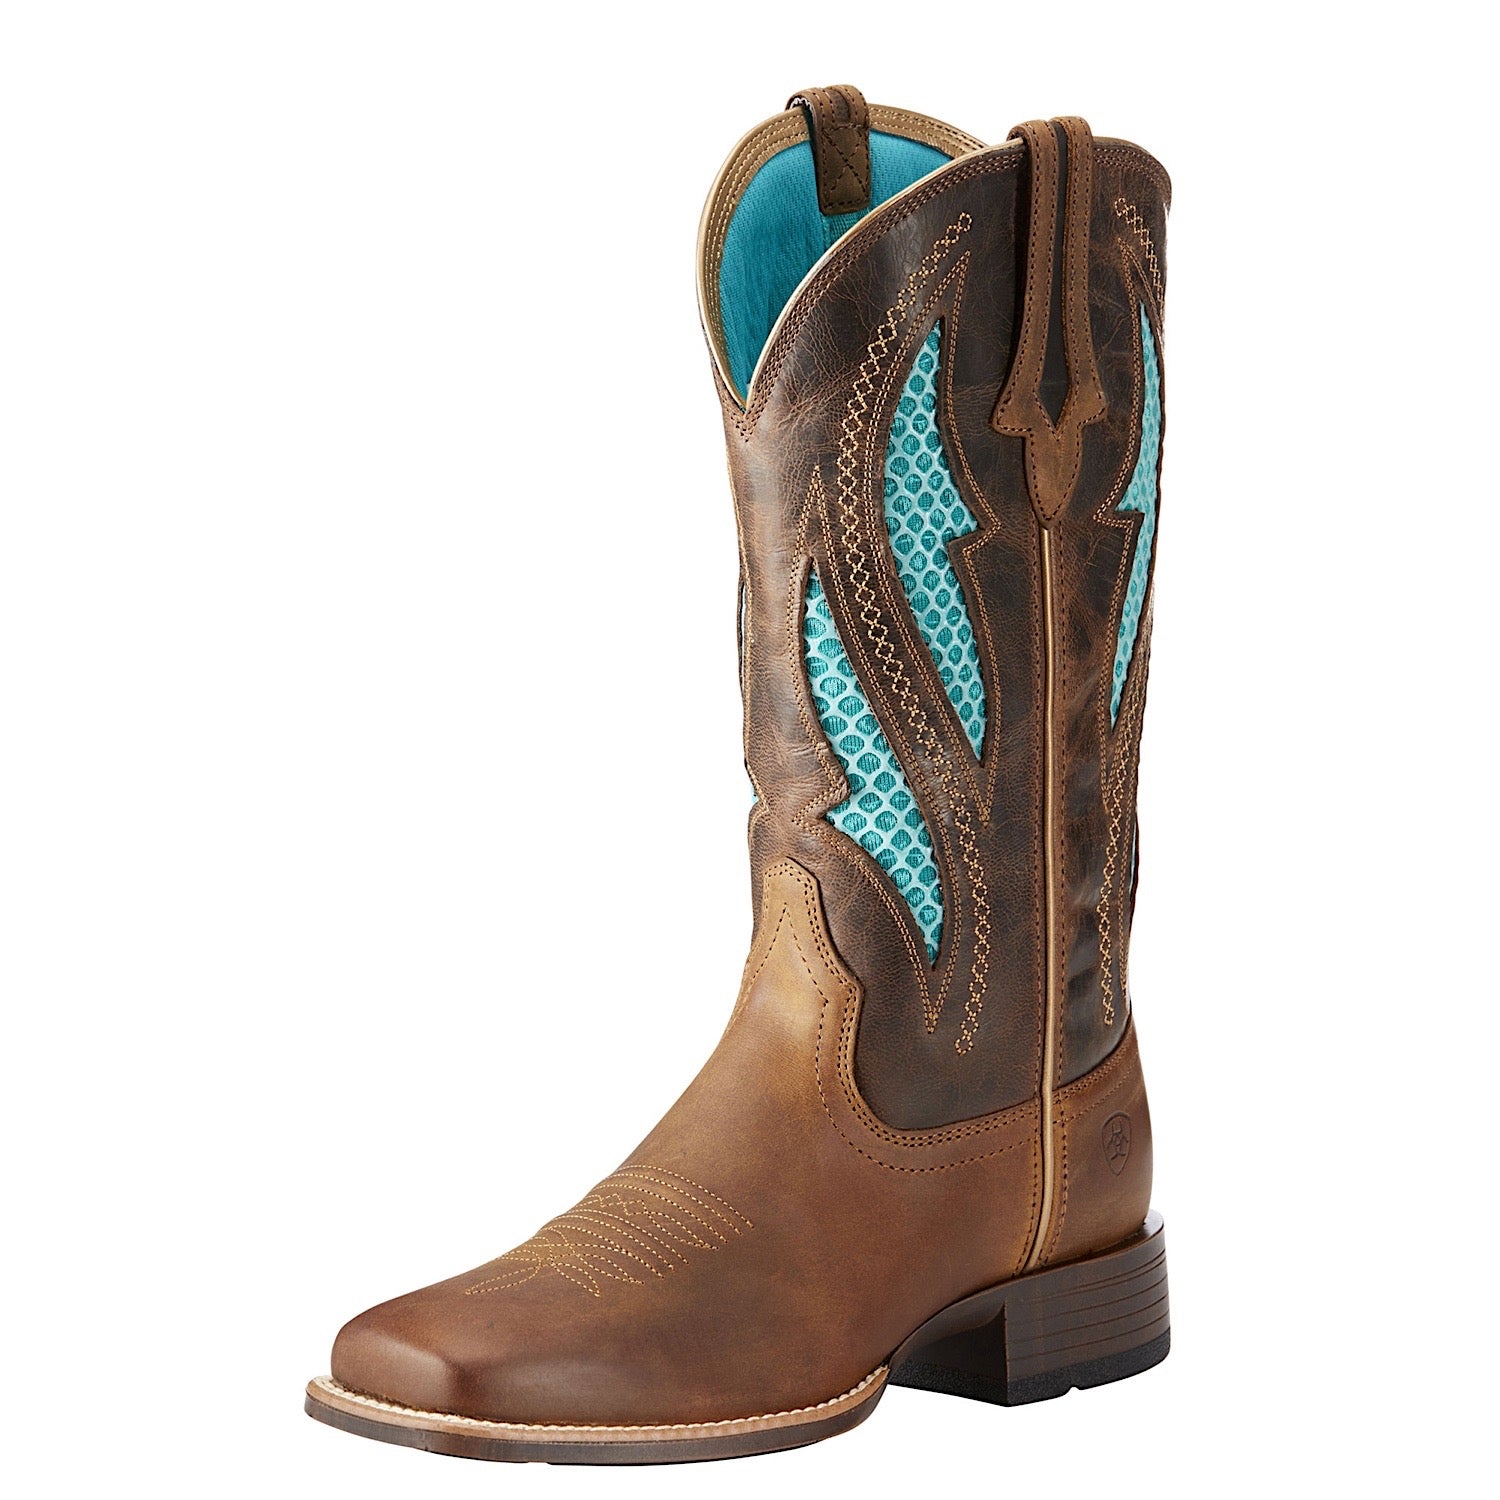 ariat women's boots with teal